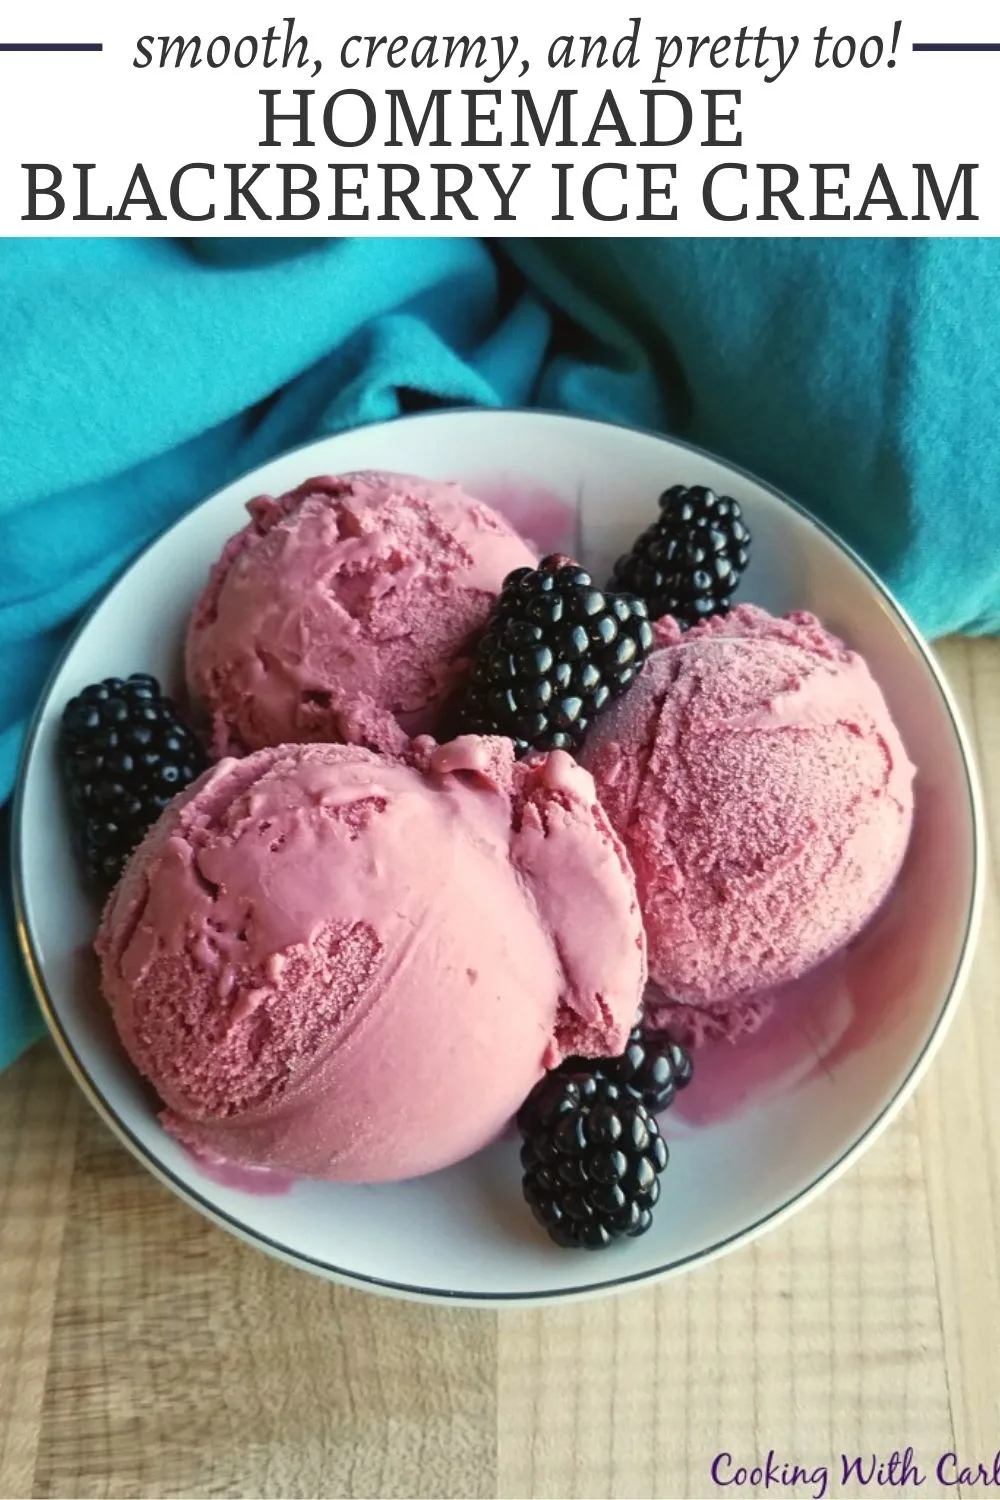 Turn fresh or frozen blackberries into delicious ice cream. The flavor and color of this delicious treat is amazing. It is the perfect way to enjoy the berries, in a cream ice cream.